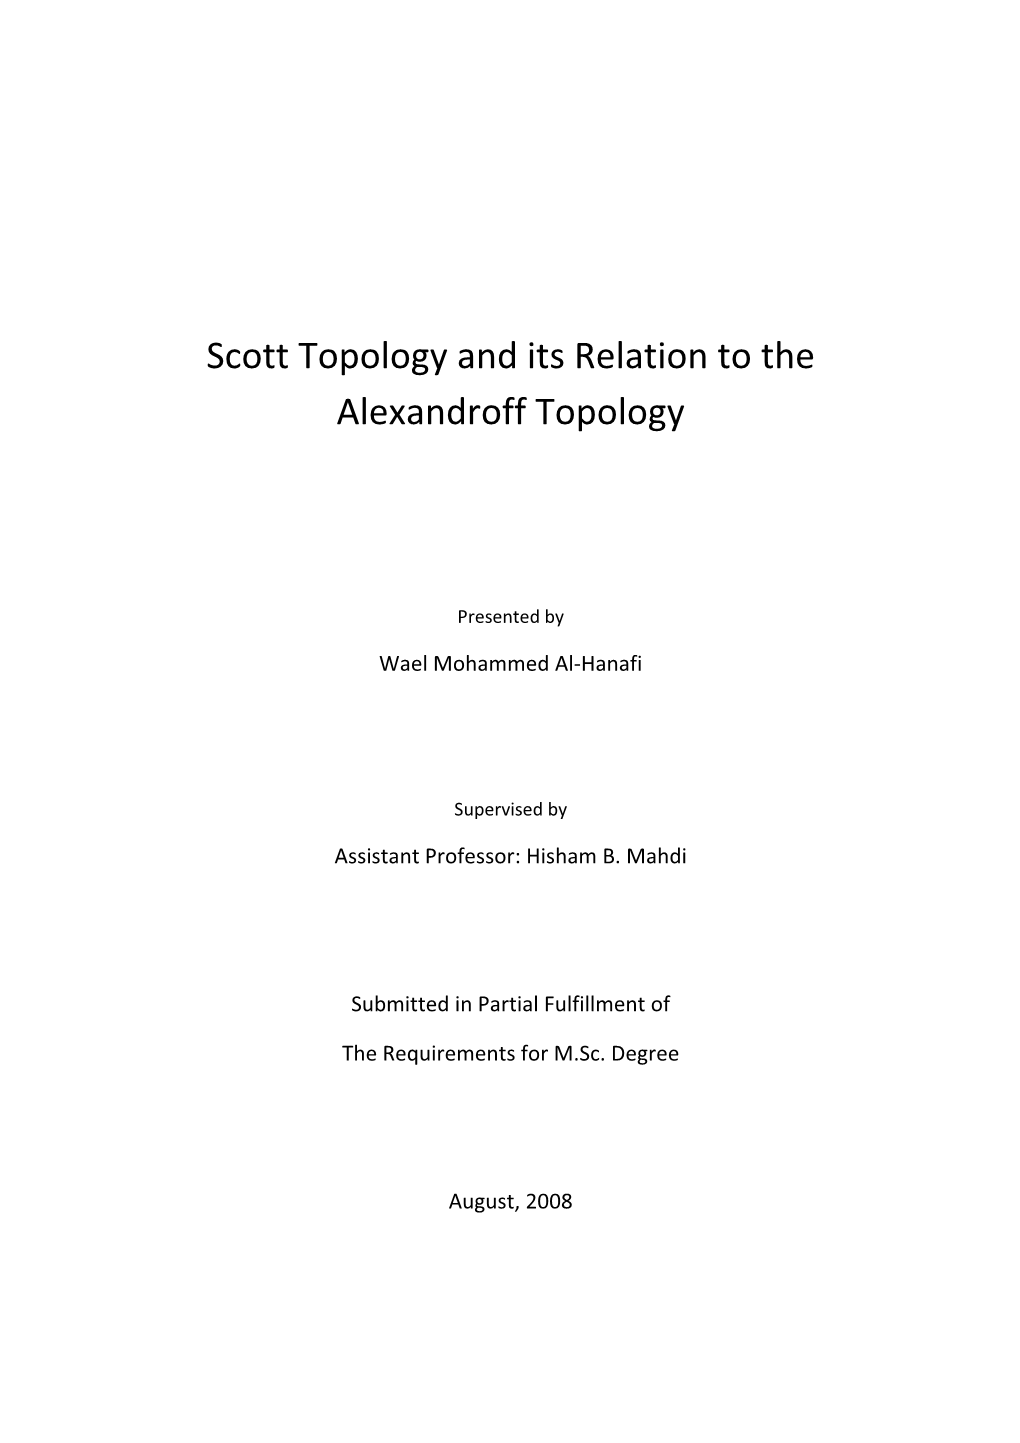 Scott Topology and Its Relation to the Alexandroff Topology